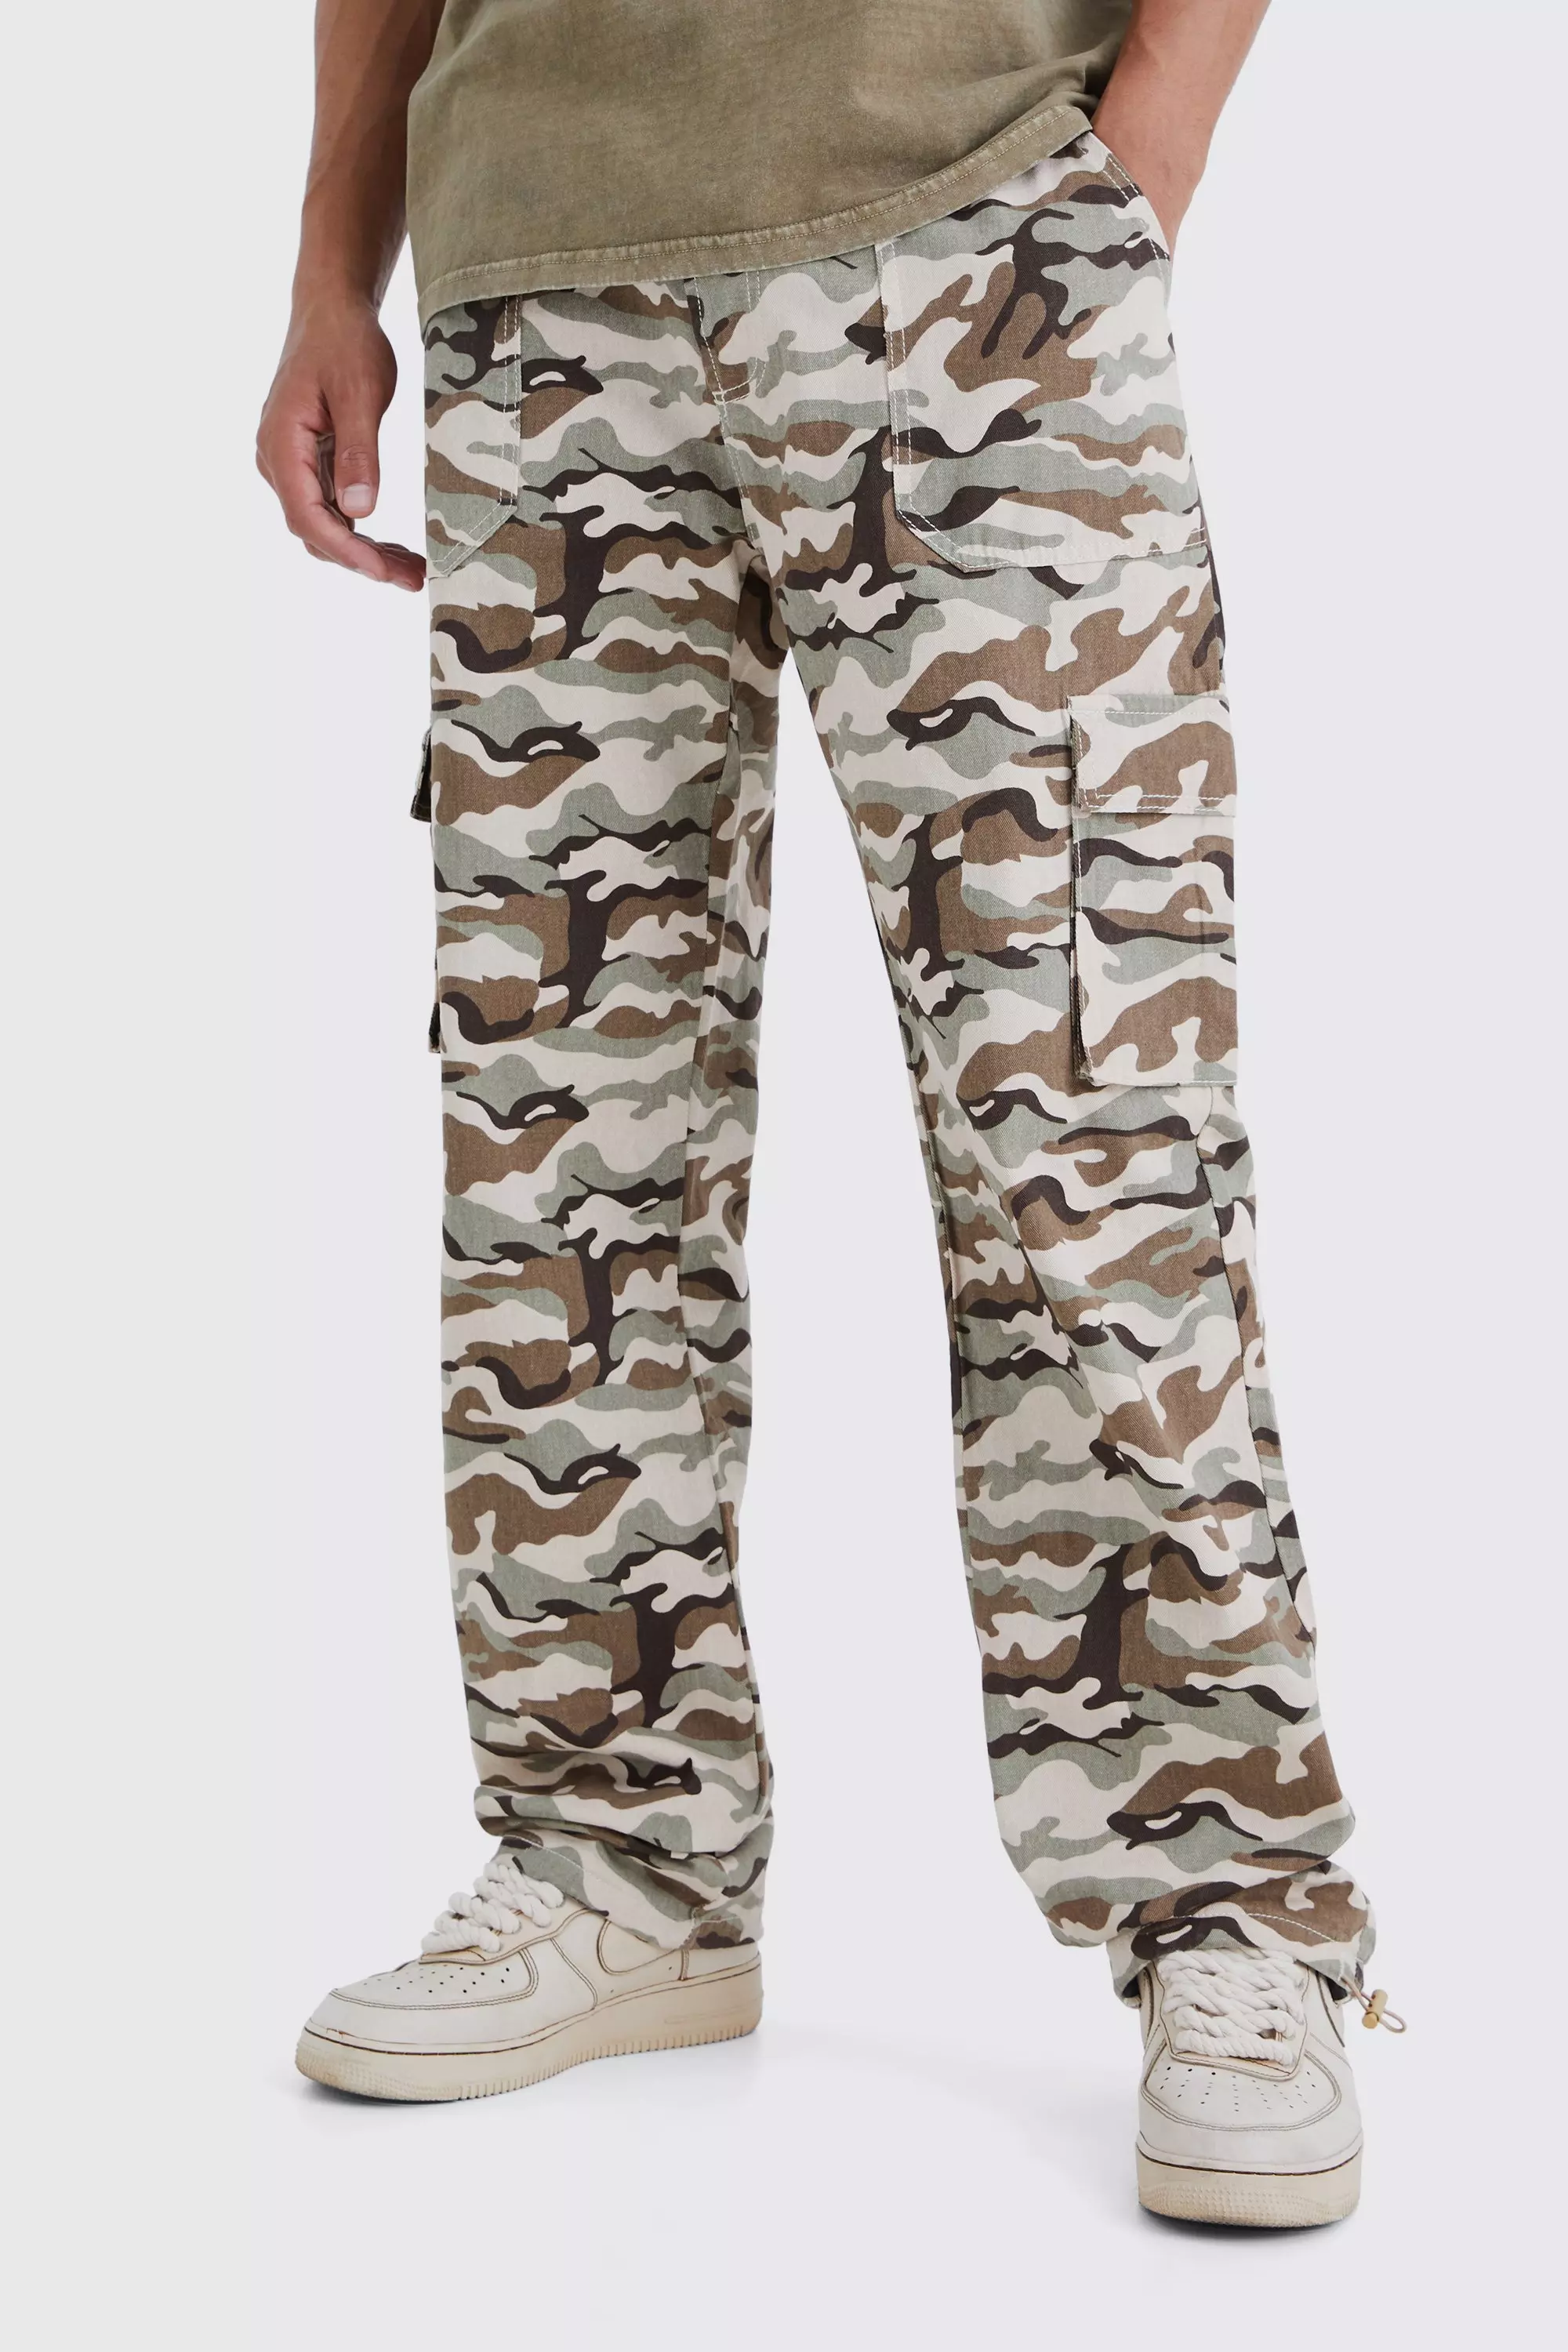 Tall Relaxed Cargo Pocket Camo Pants Sand